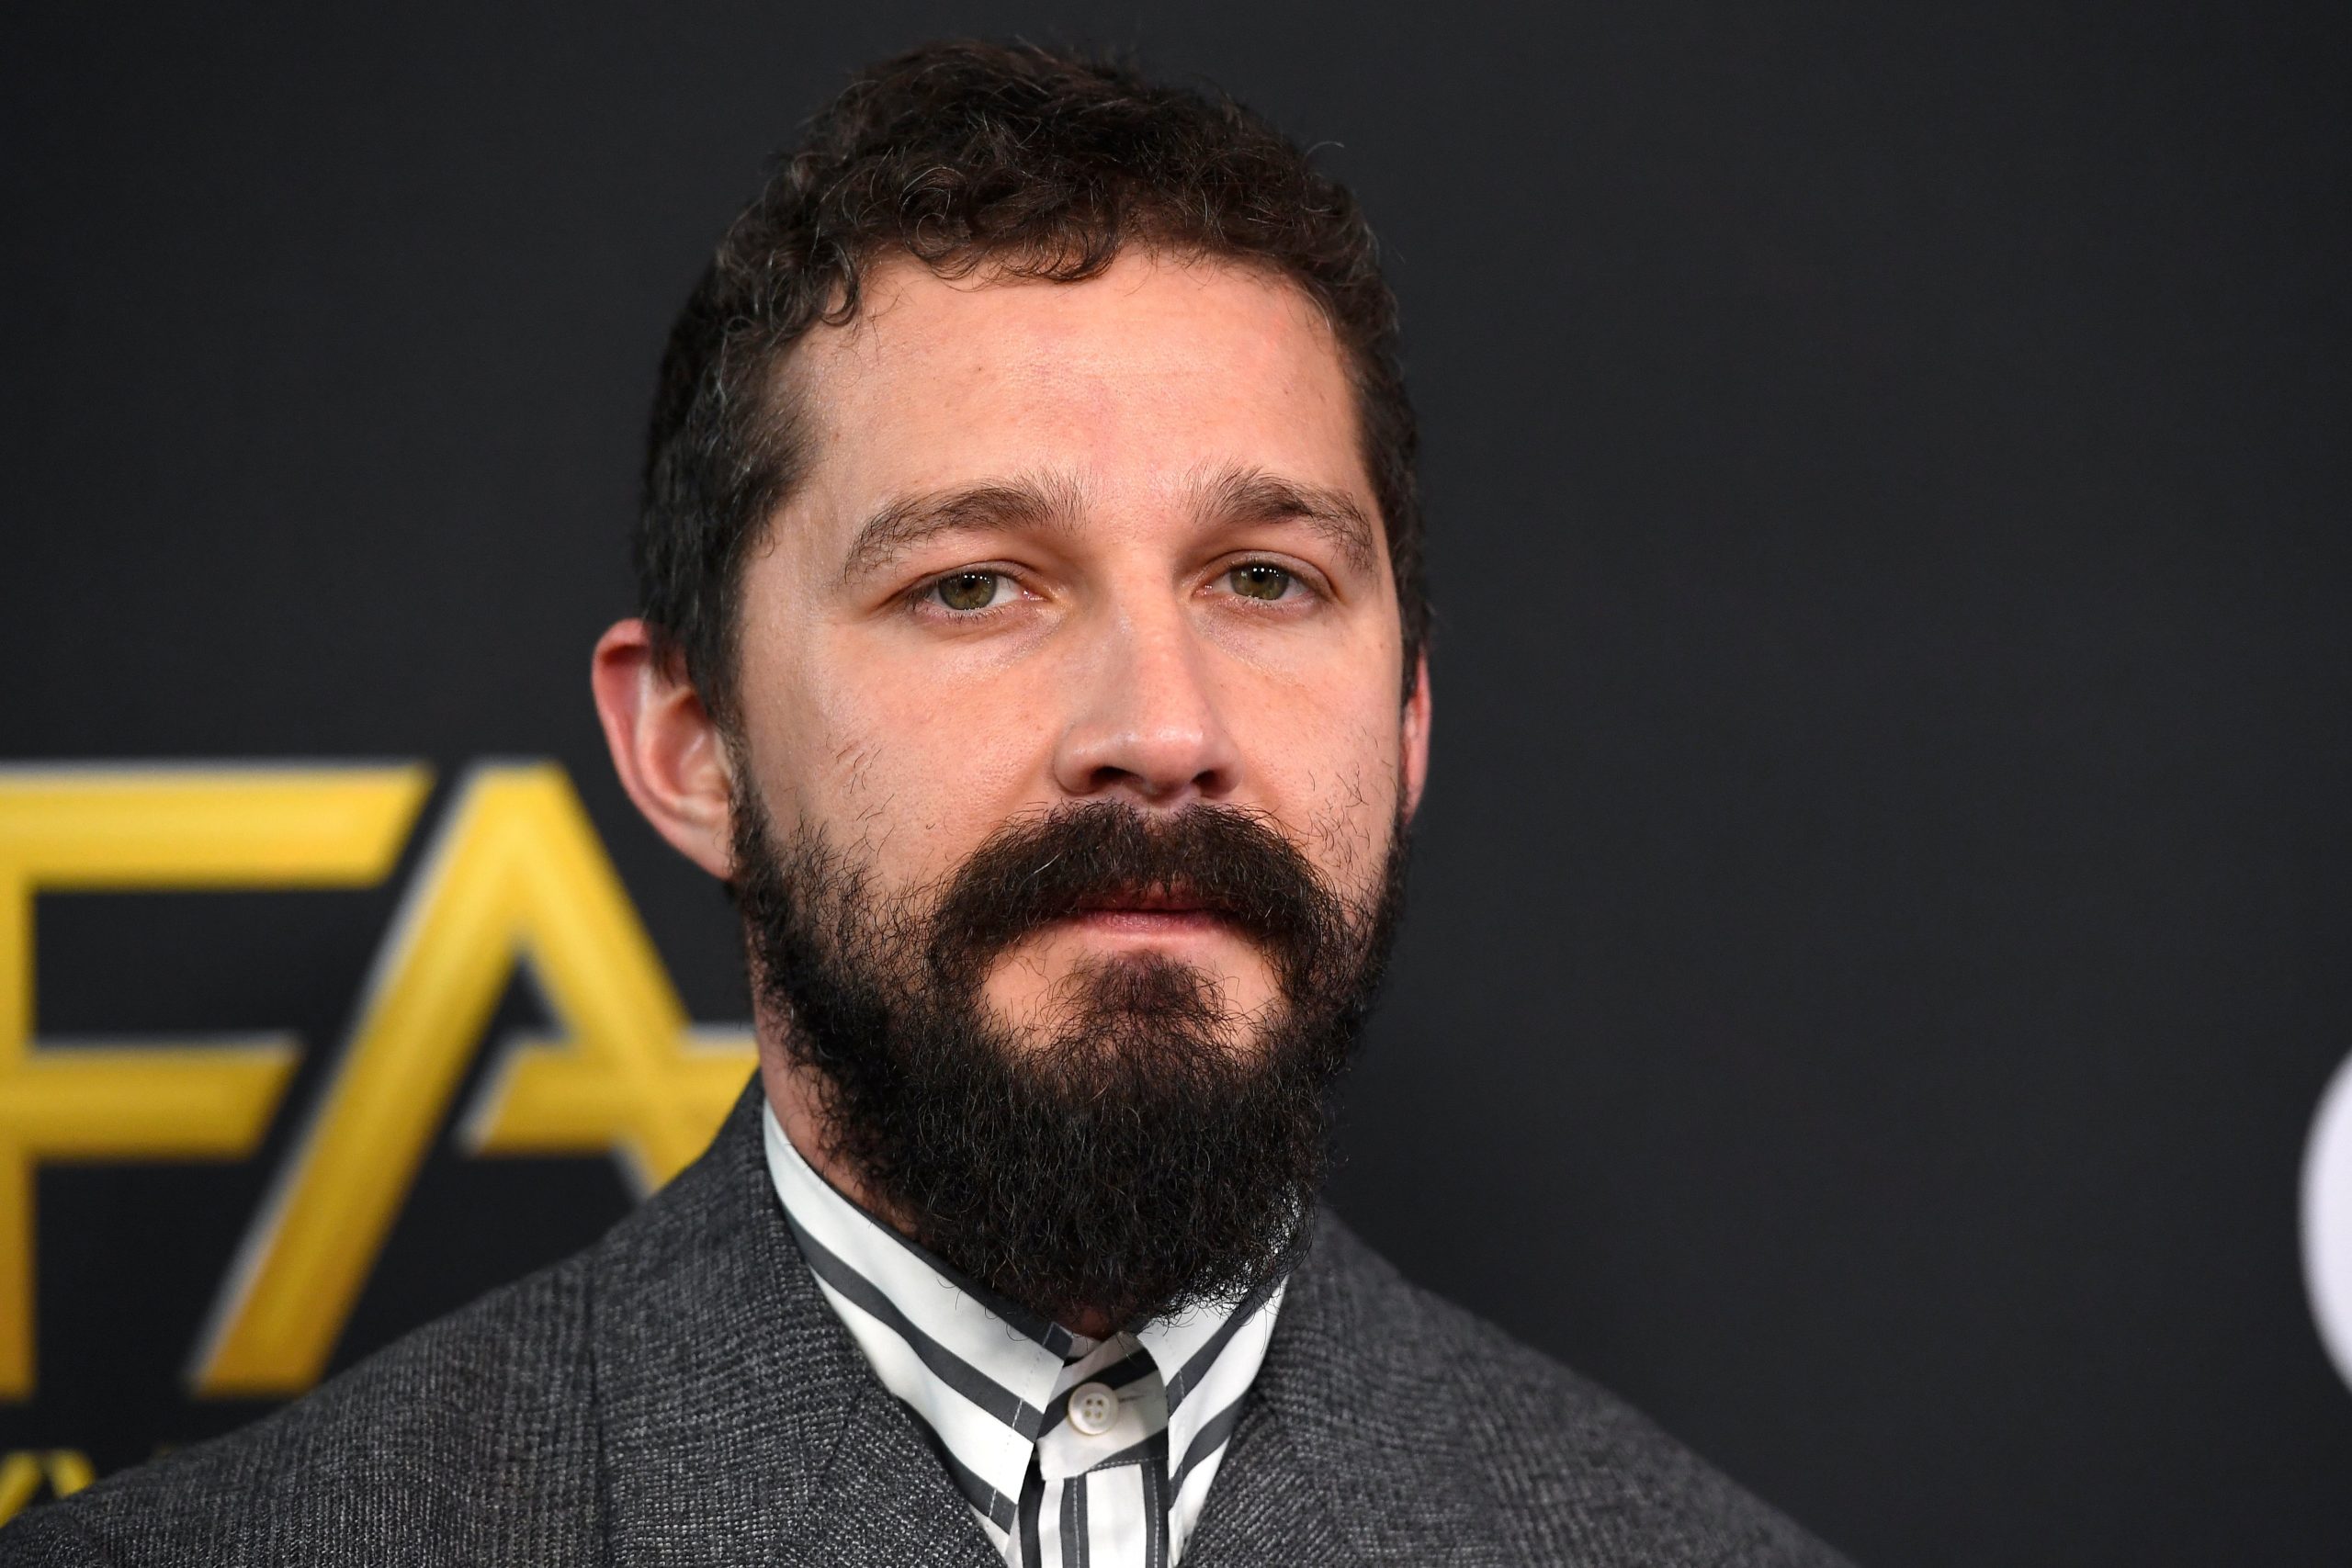 Actor Shia LaBeouf Ordered to Enter Anger Management Therapy Related to 2020 Altercation – NBC Los Angeles